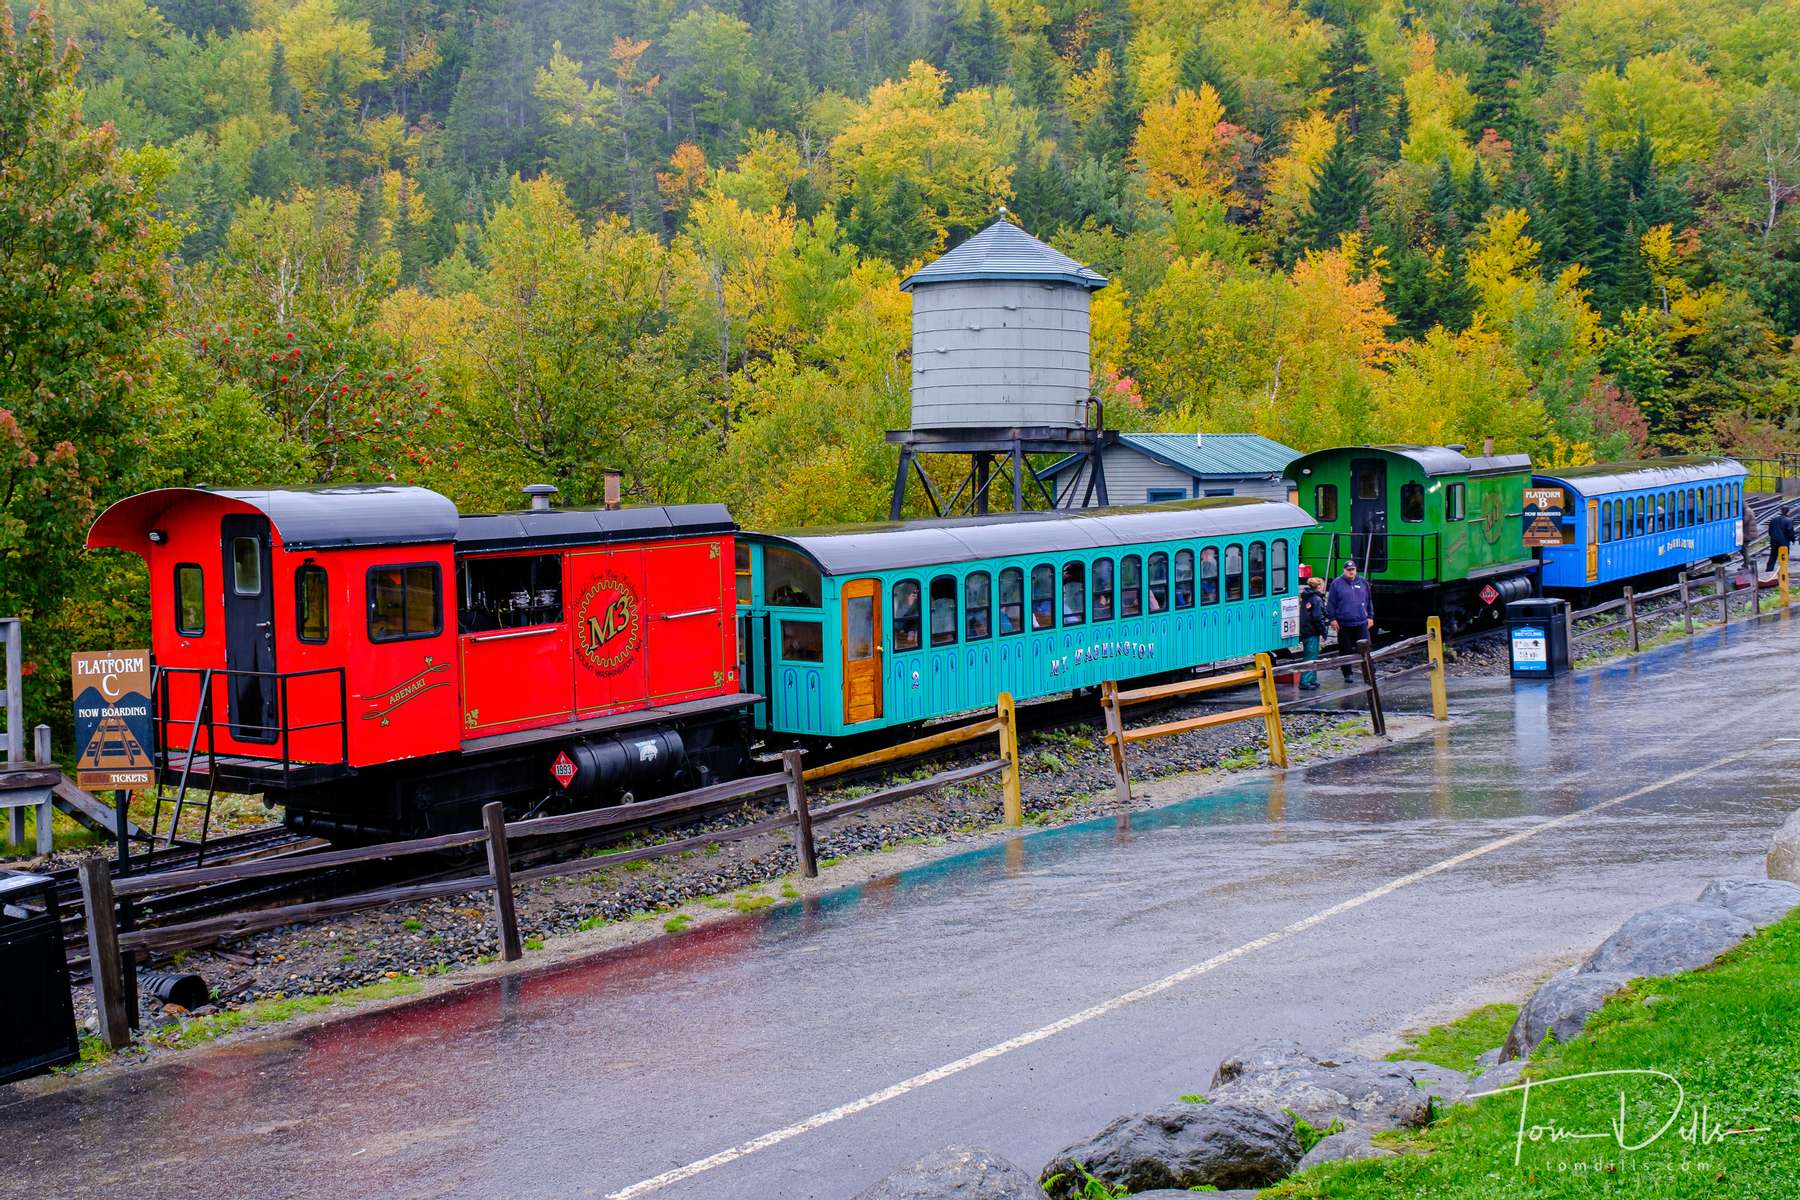 Trains awaiting departure from the base station of the Mount Washington Cog Railway